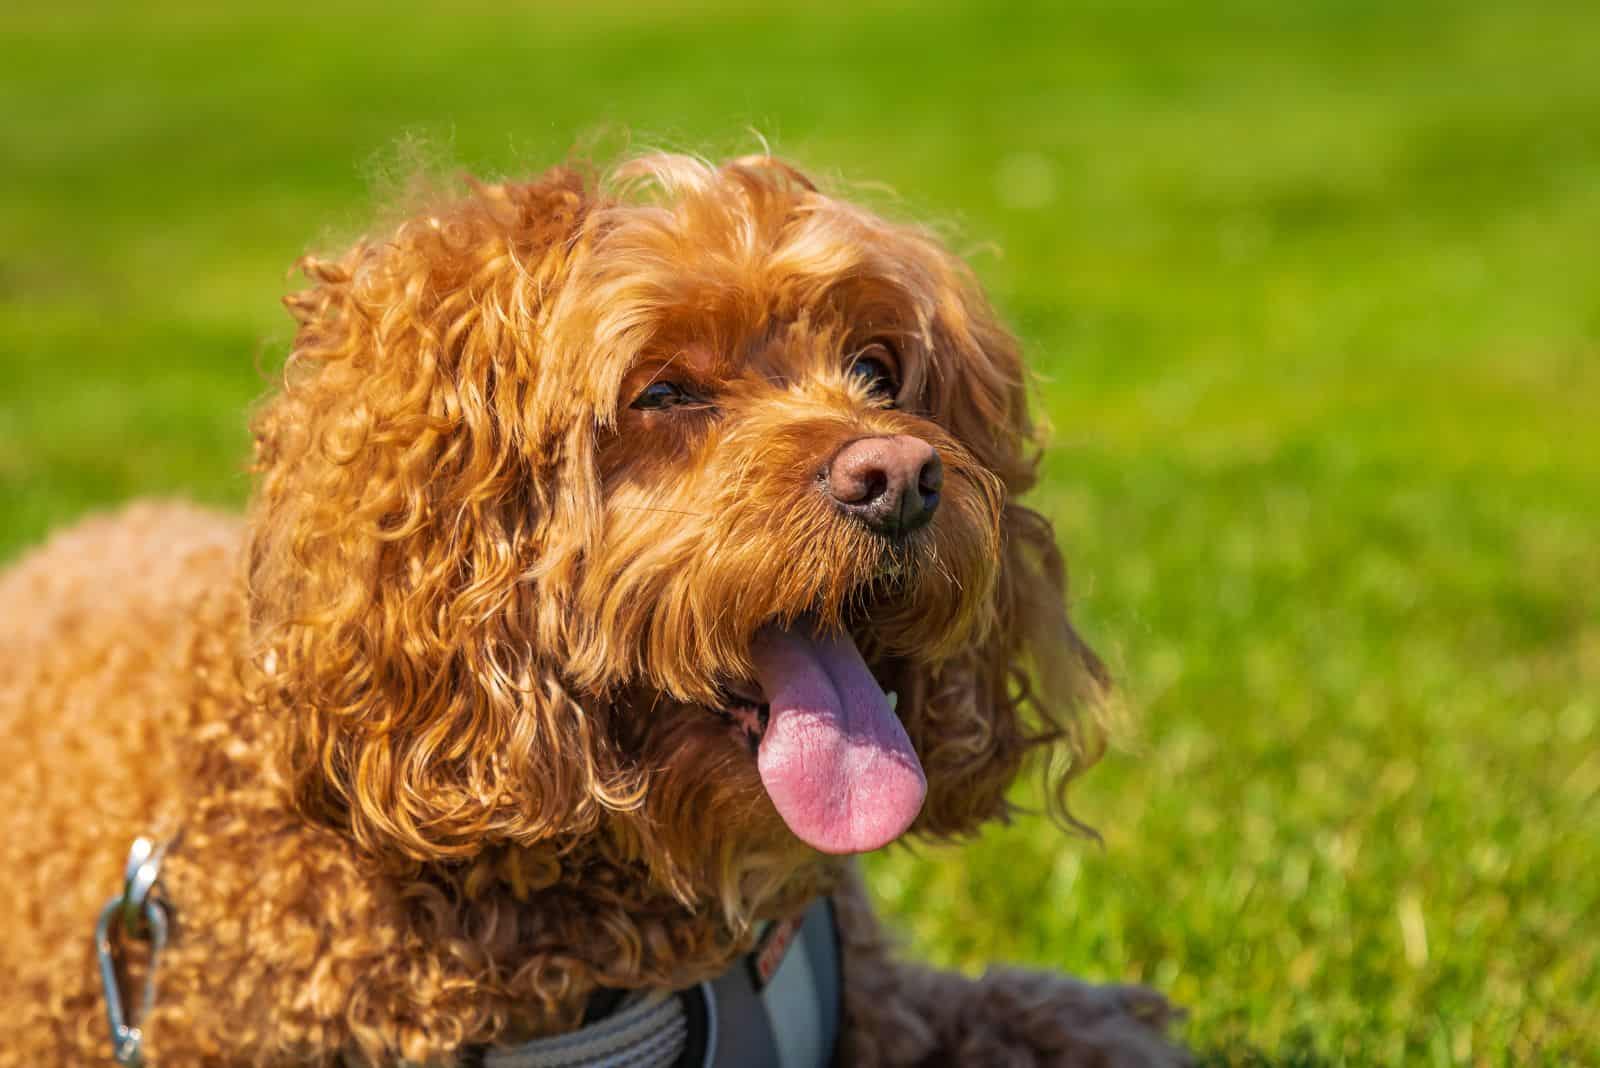 The Cavapoo is lying on the grass with its tongue out